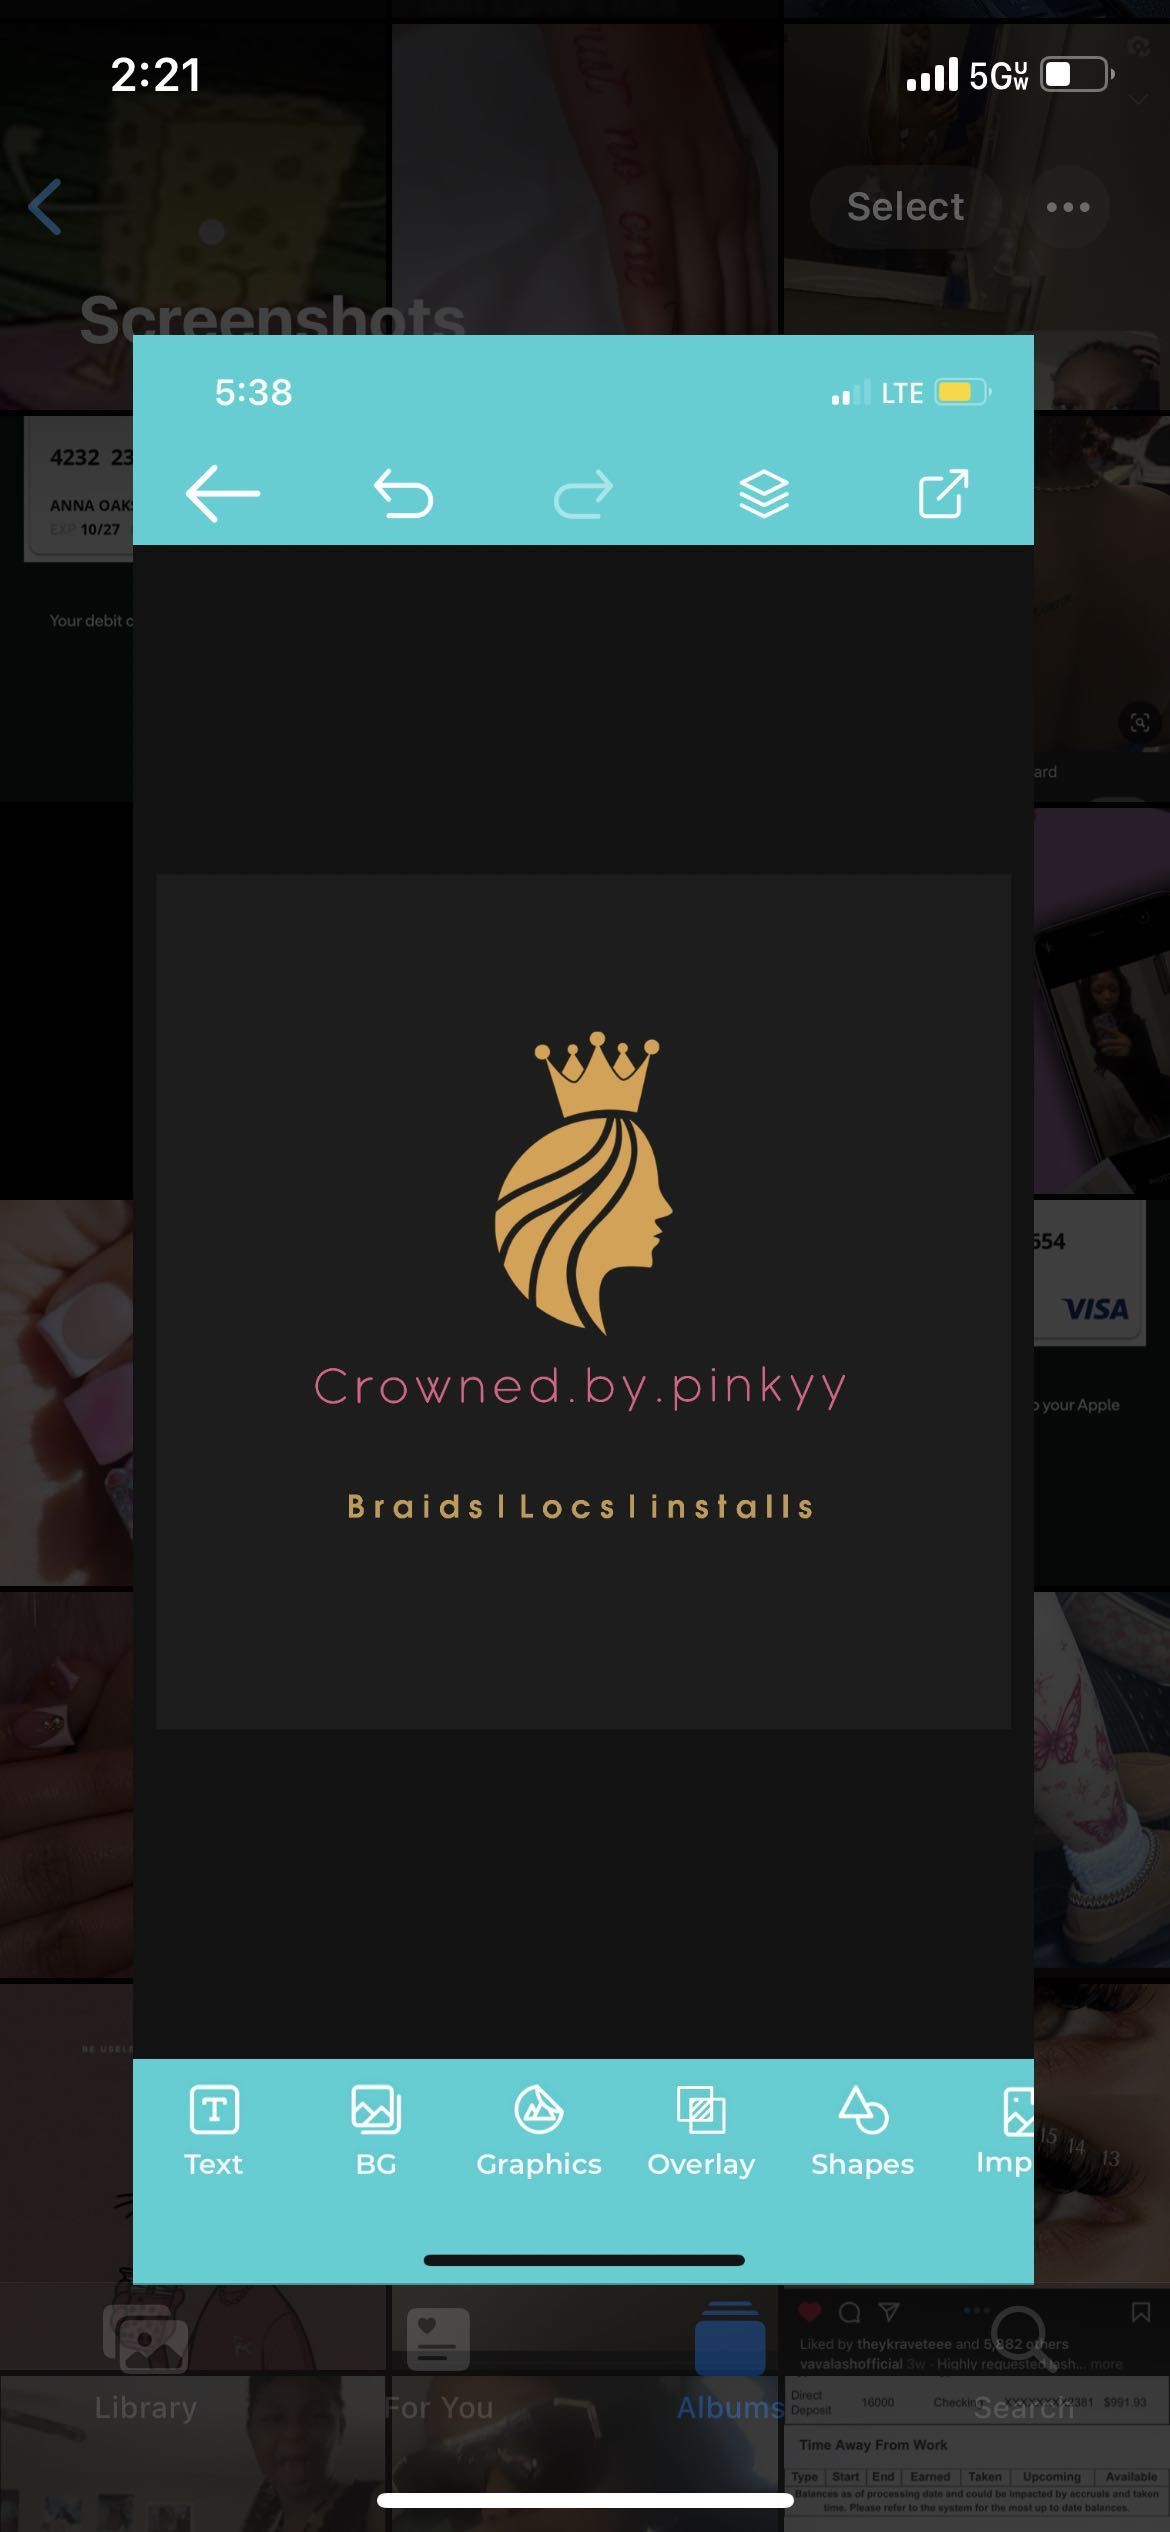 Crowned.by.pinkkyy, 2104 Gilliam Ln, Raleigh, 27610